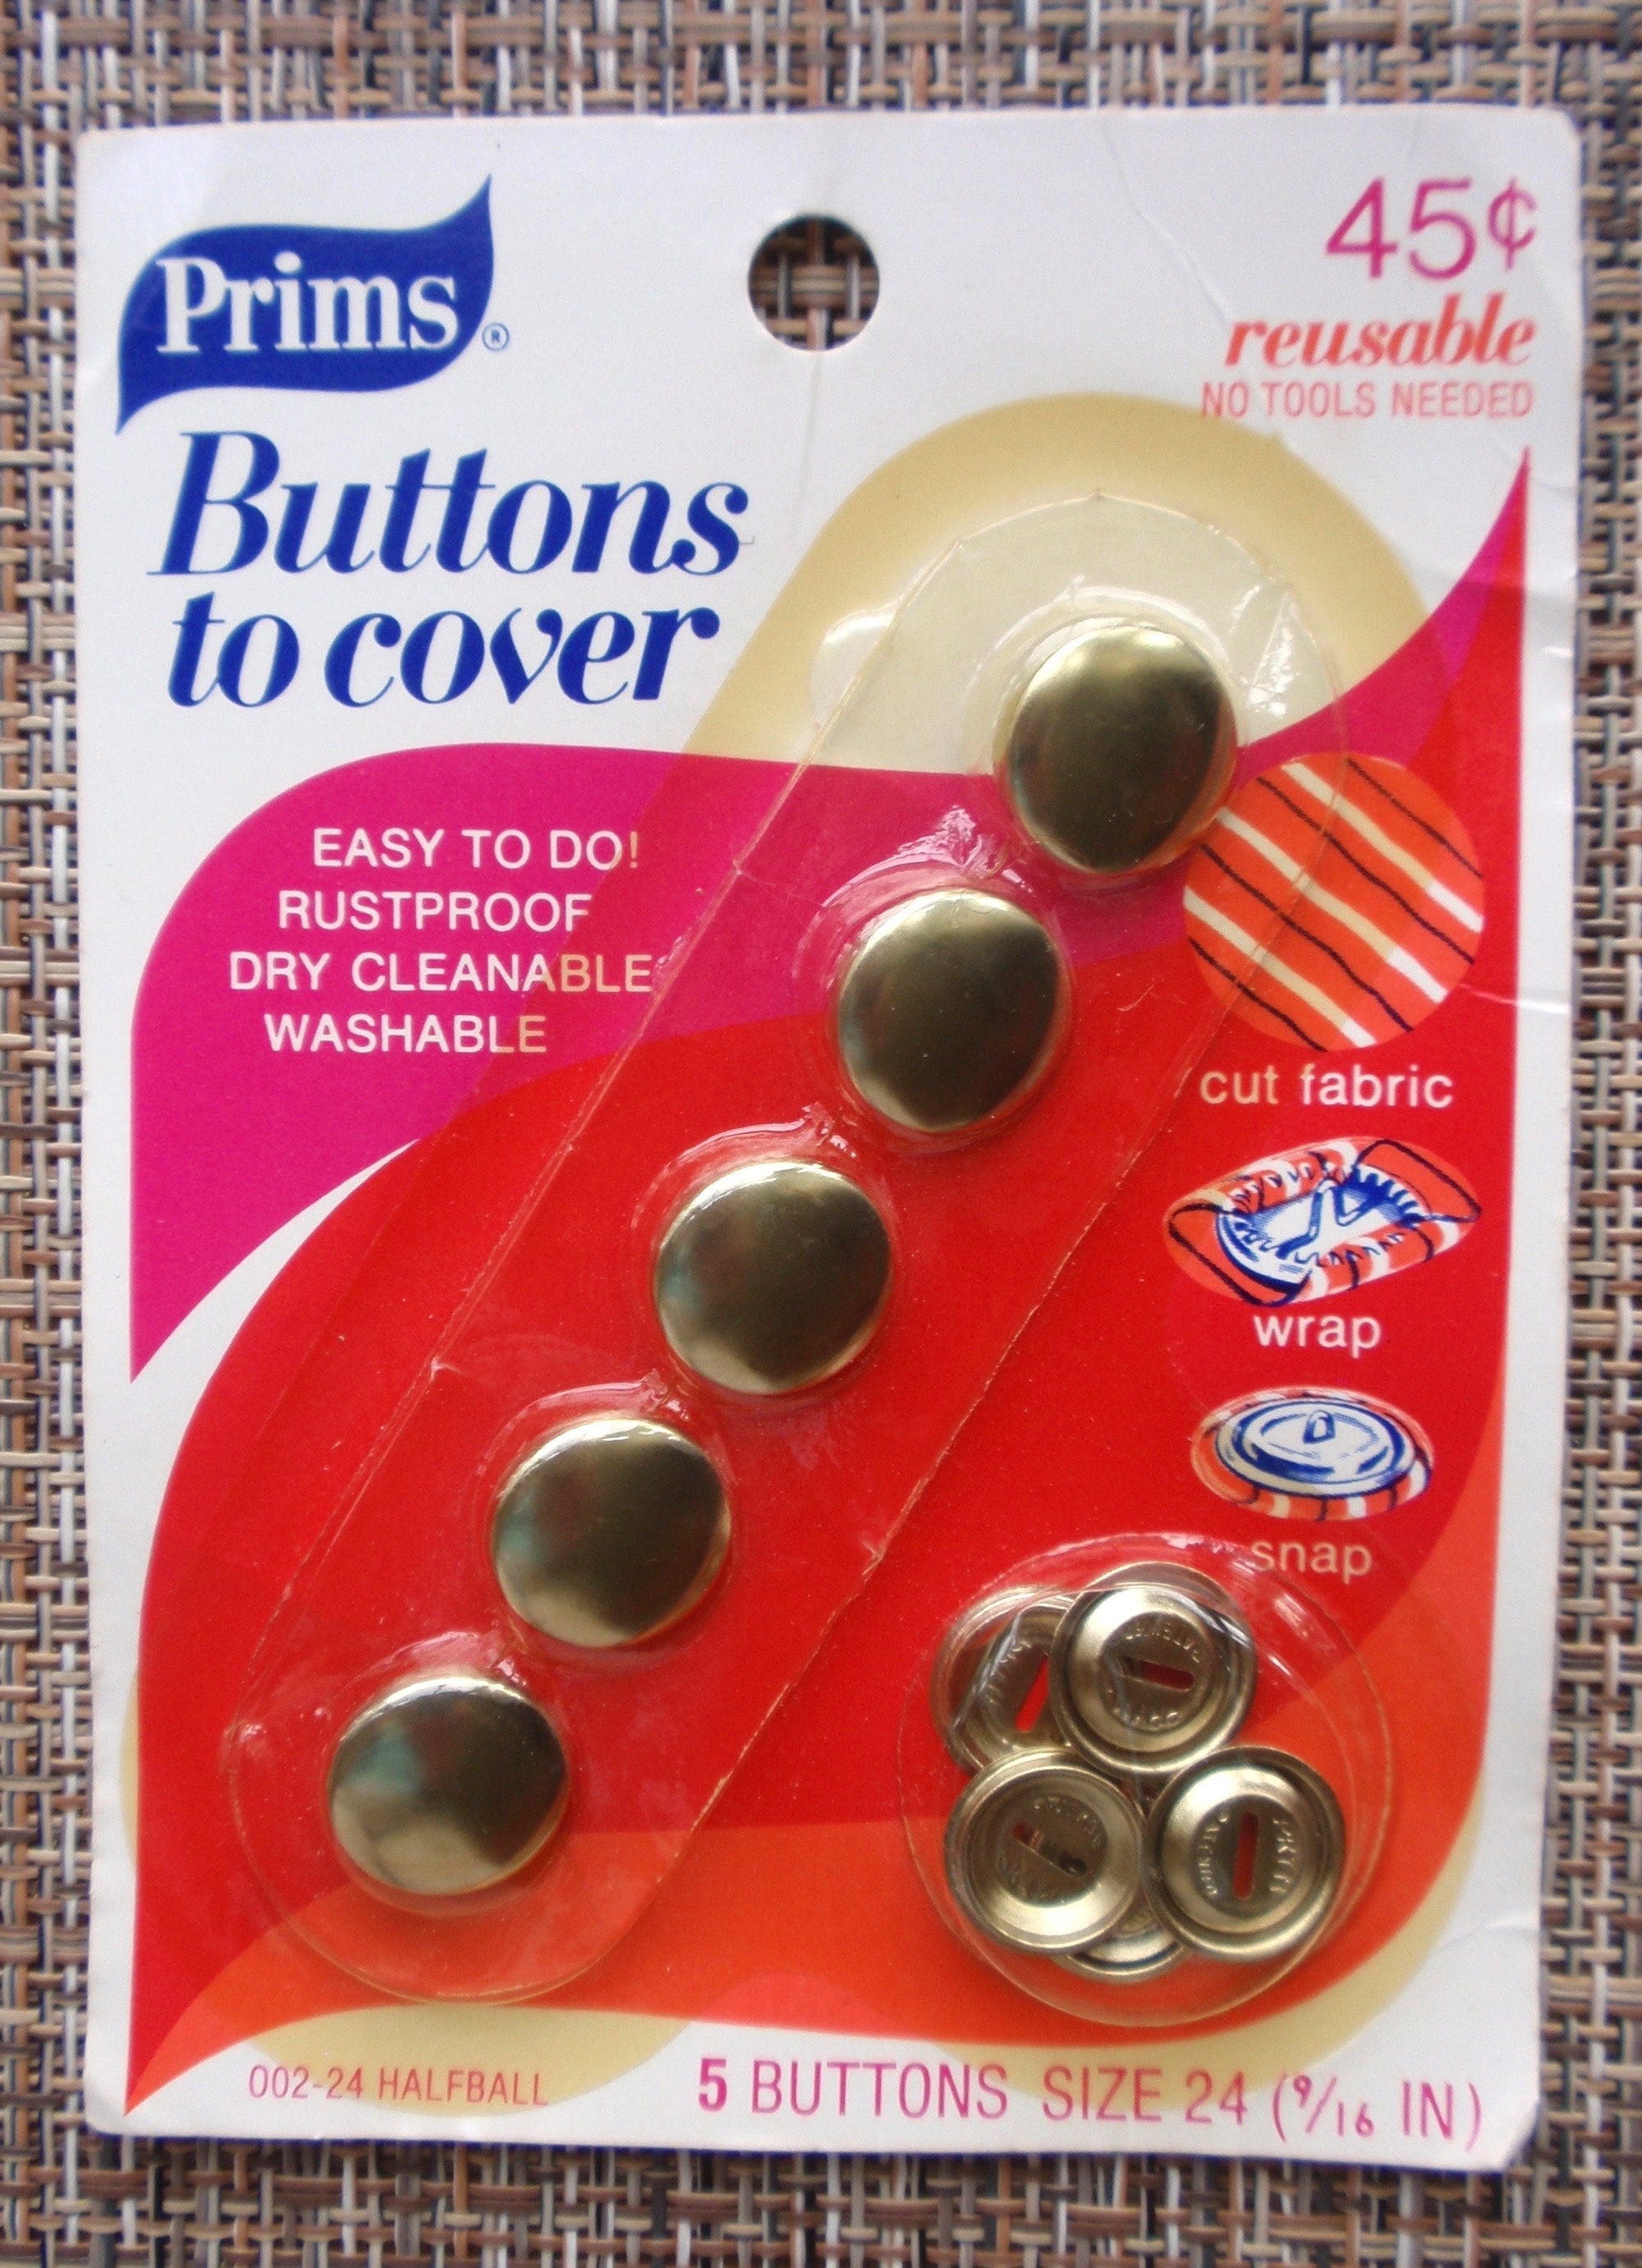 Hemline Self Cover Buttons Shells Trims Plastic Top 11mm No Sewing Or Tool Required Pack of 50 